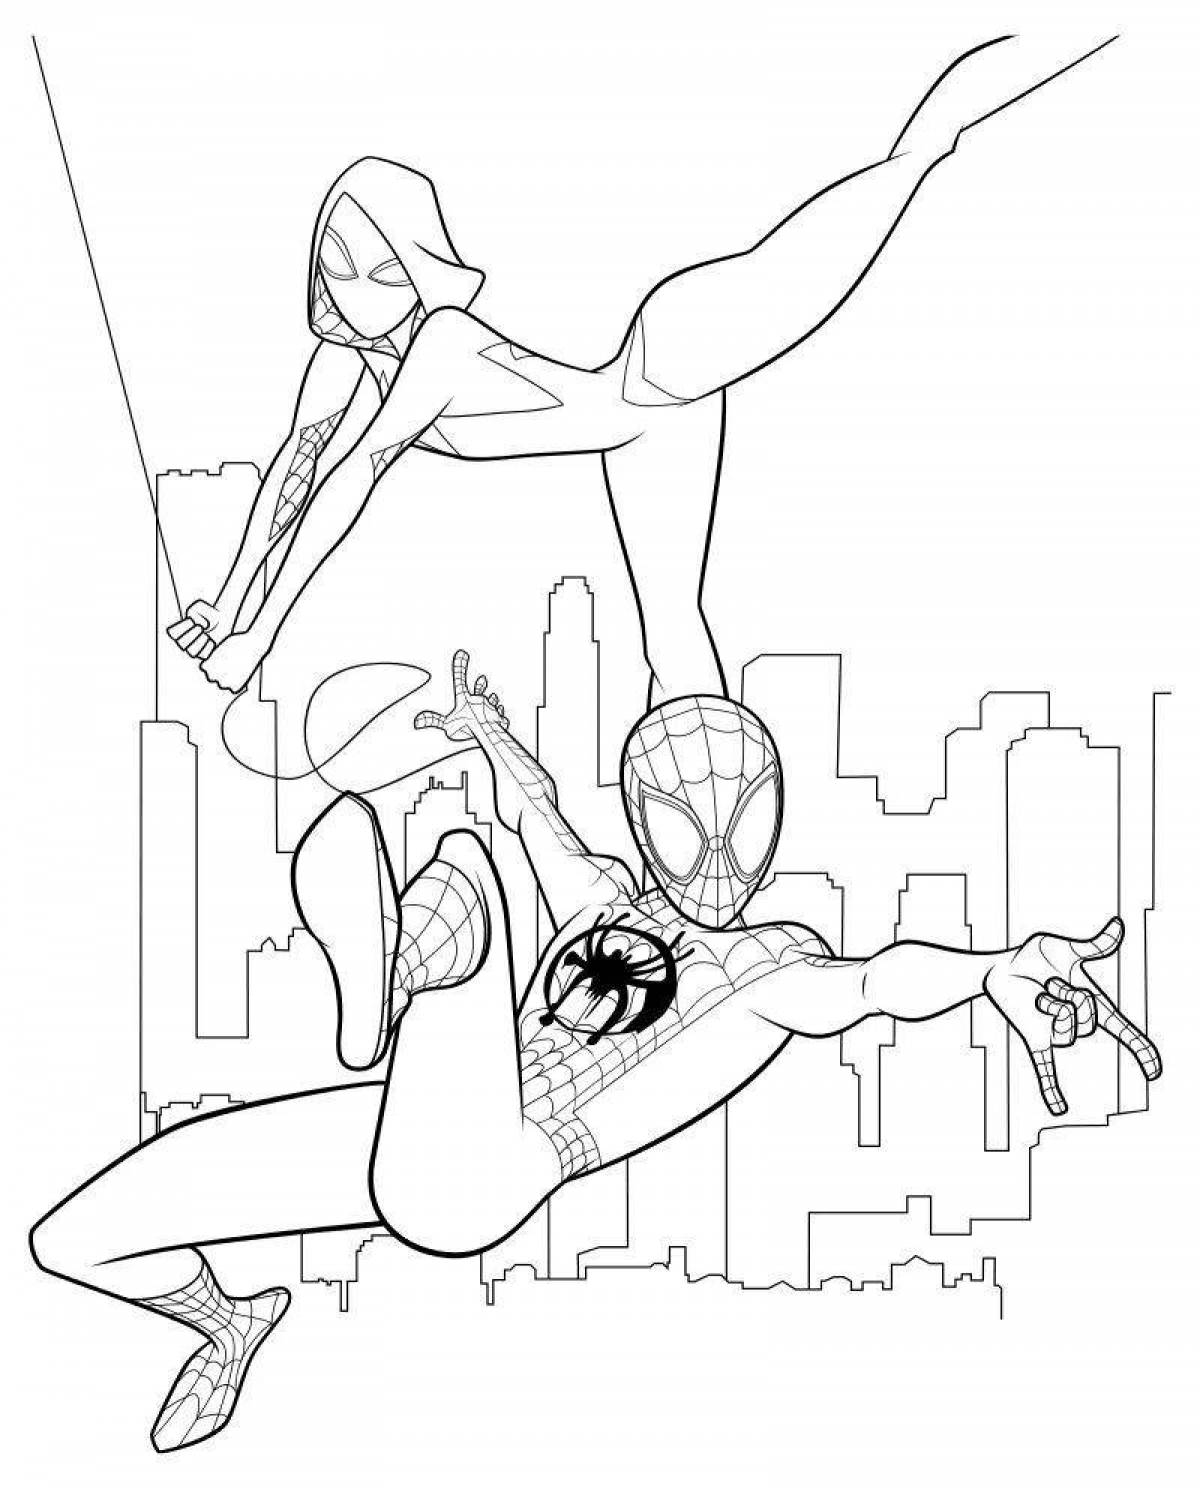 Fun coloring book for spider girls